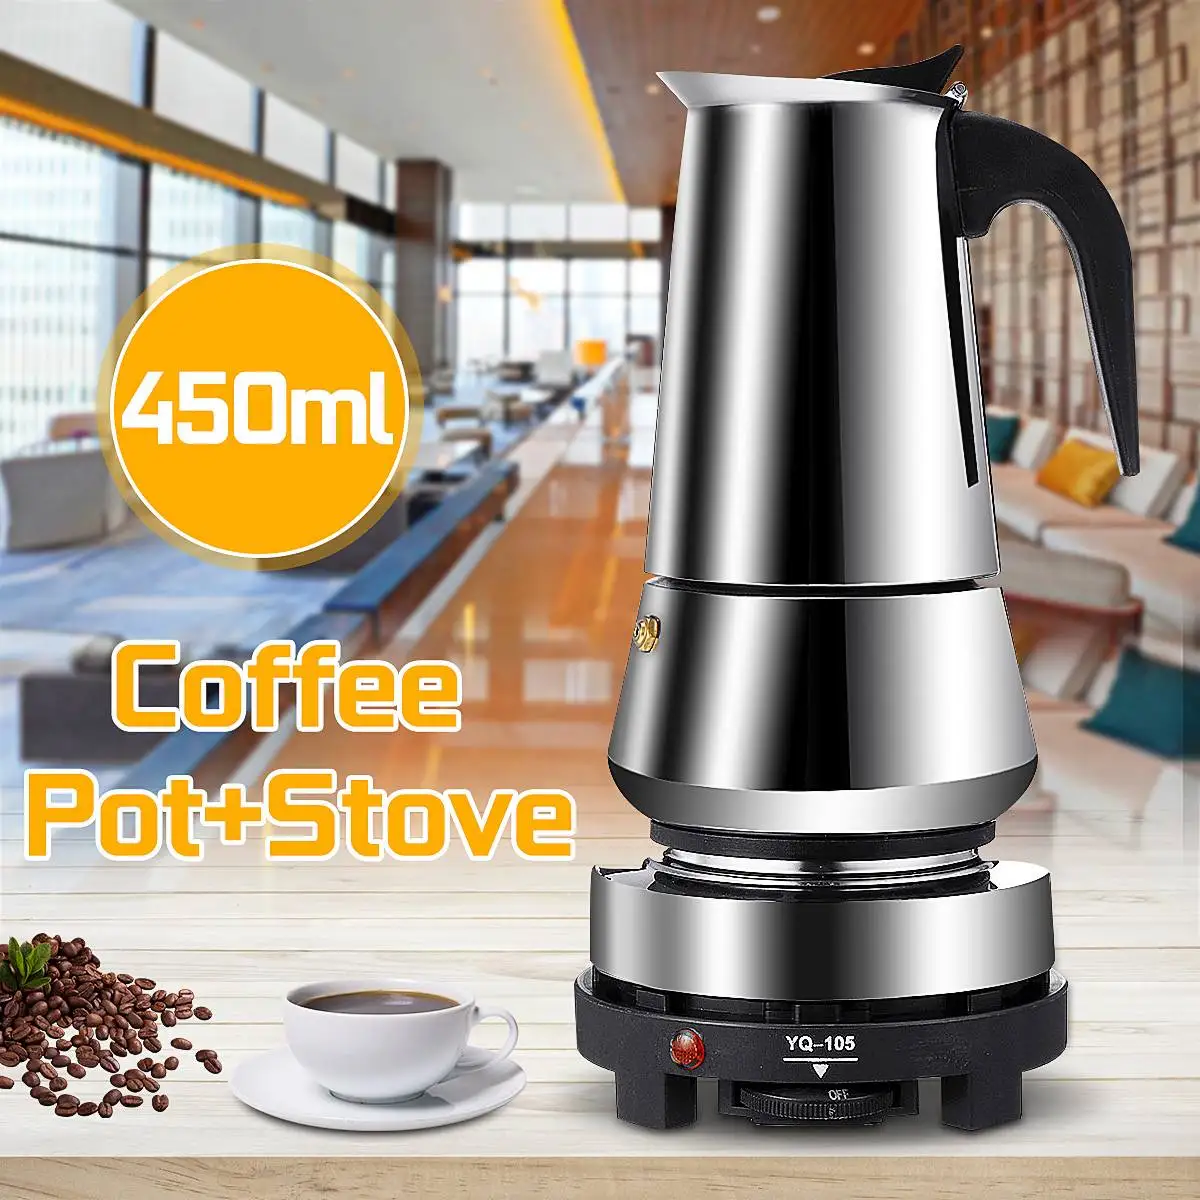 Portable Espresso Moka Latte Coffee Maker Pot Stainless Steel Coffee Brewer Kettle Electric Heater Stove Coffee Pot 450ML 9 Cups